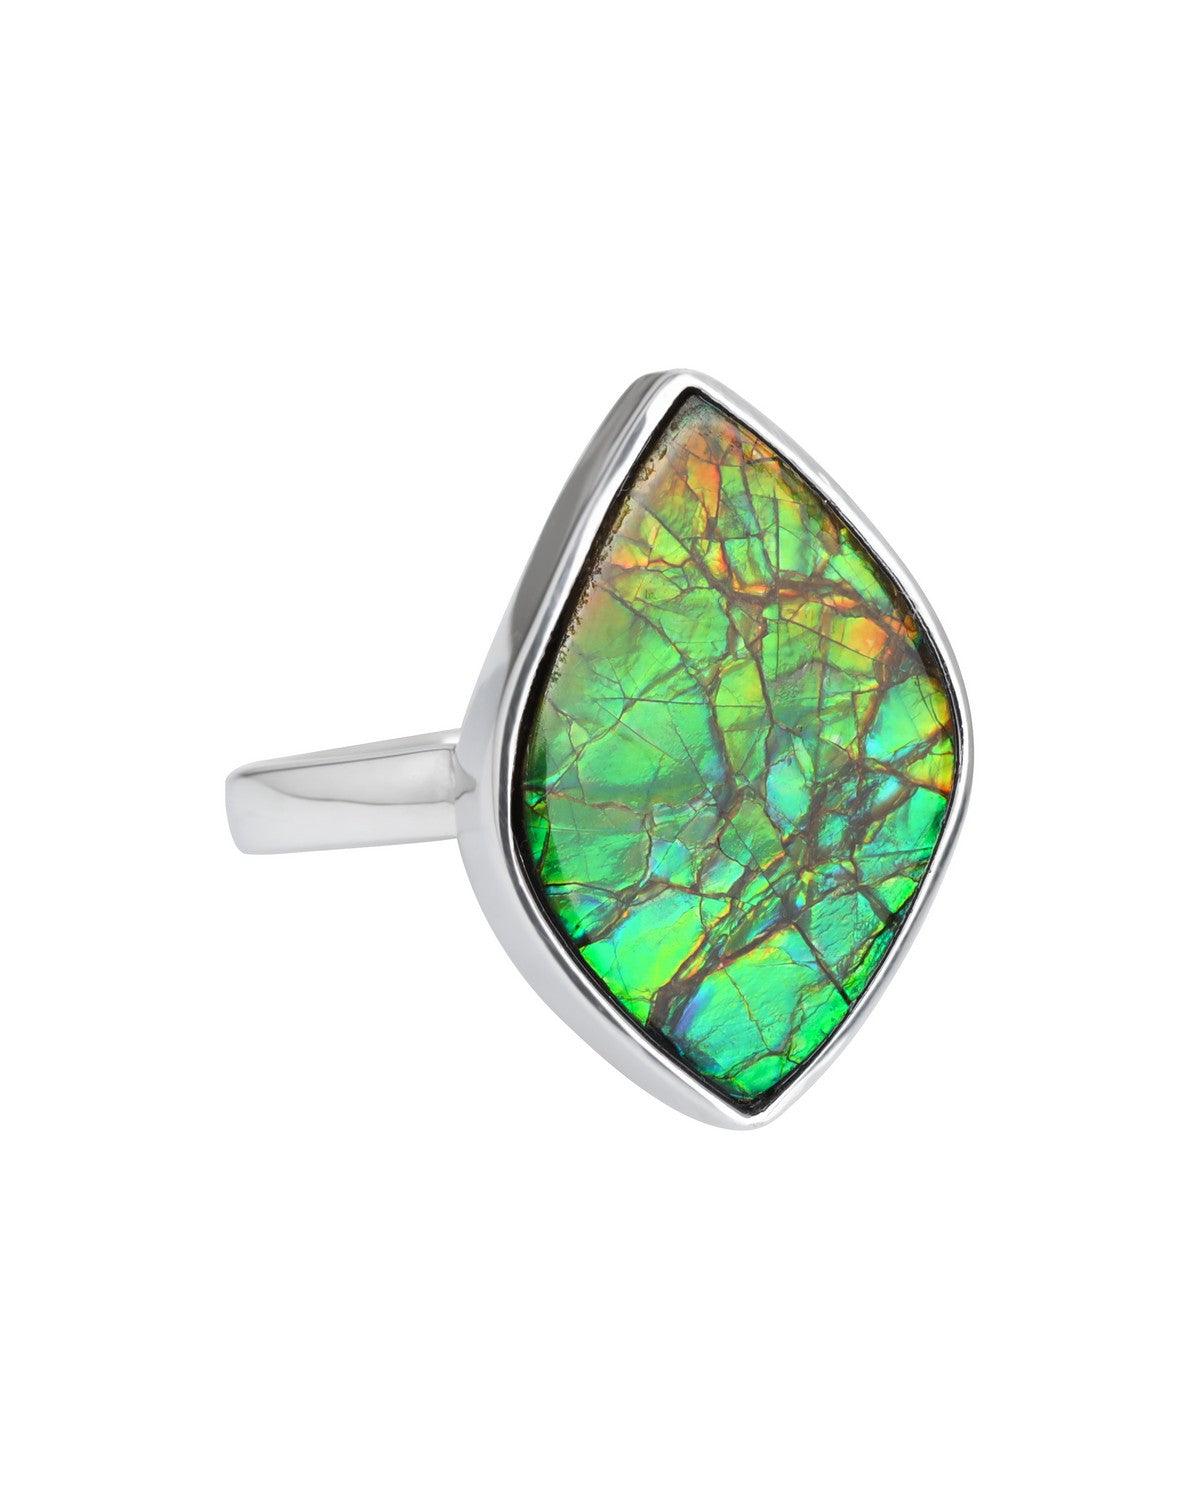 10.15 Ct. Ammolite Solid 925 Sterling Silver Statement Ring Jewelry - YoTreasure